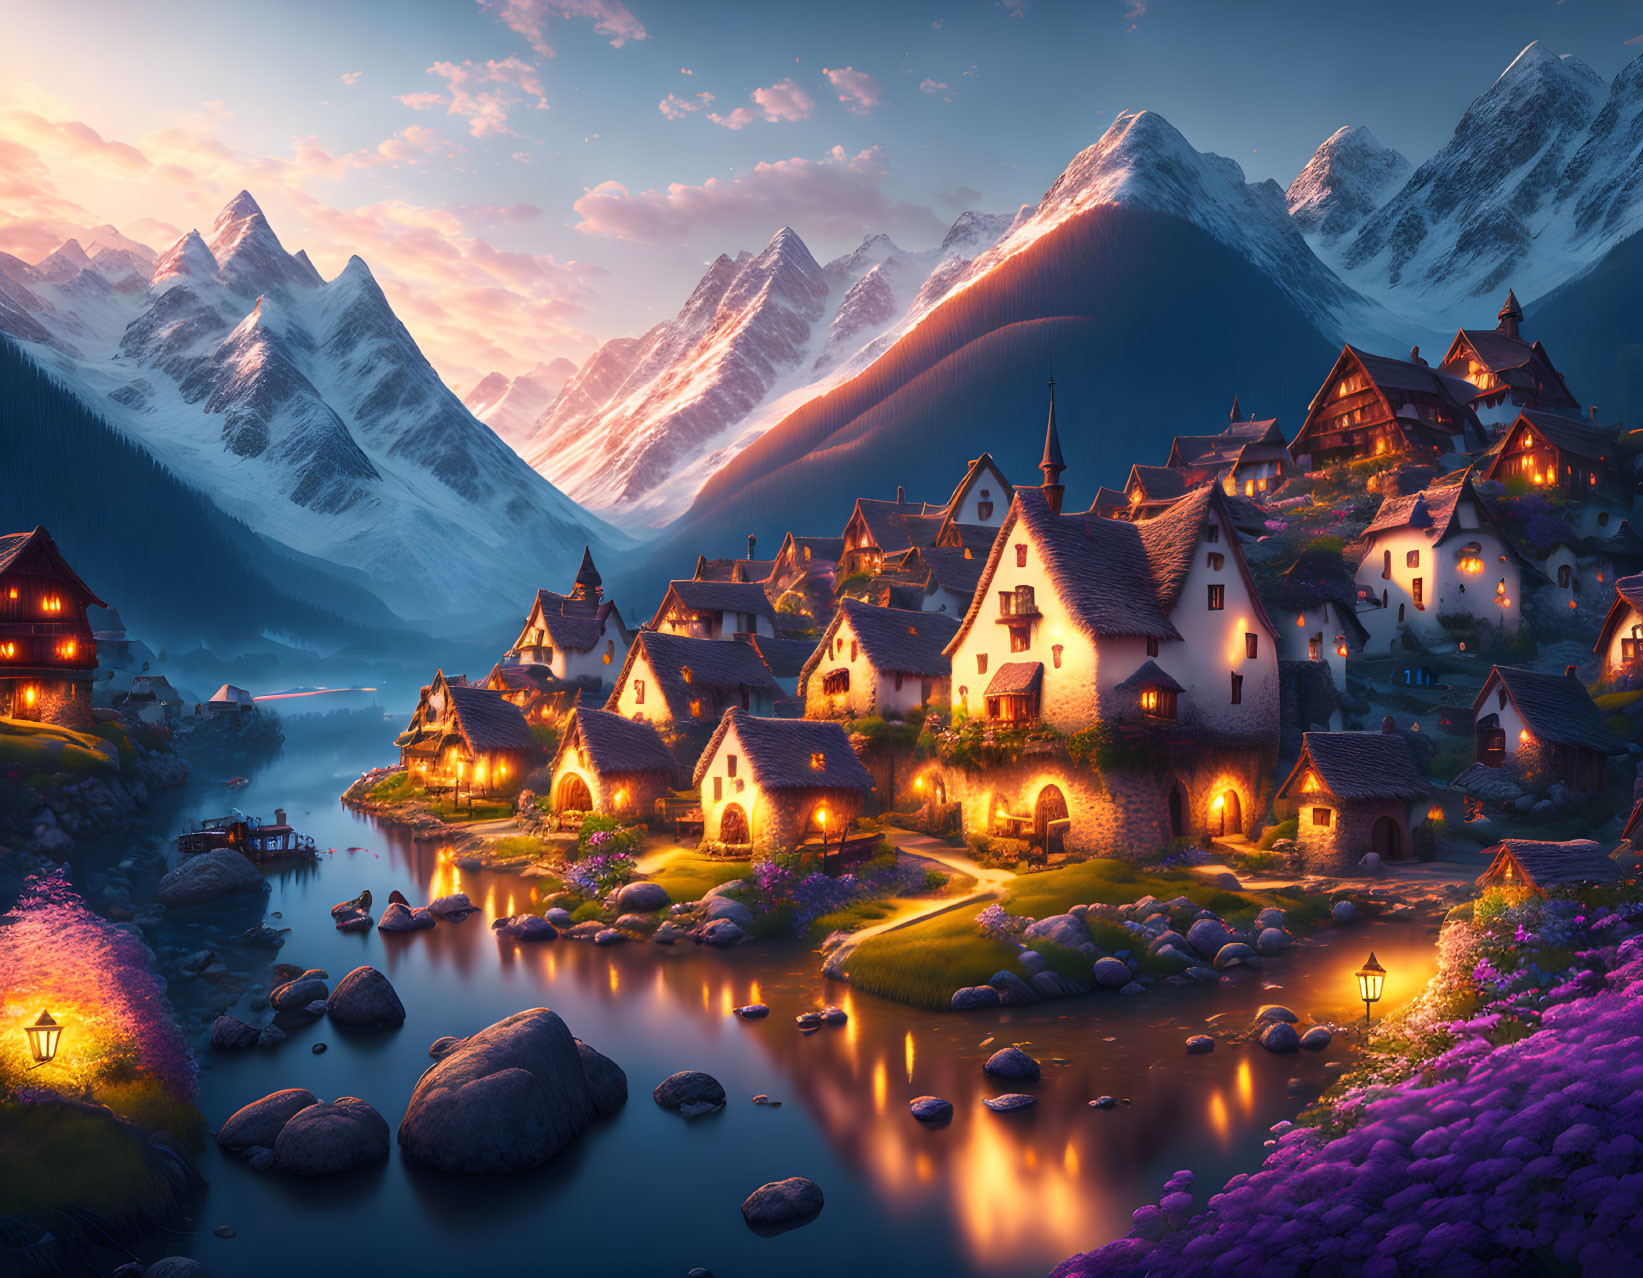 Peaceful village nestled between snowy mountains and calm river at dusk